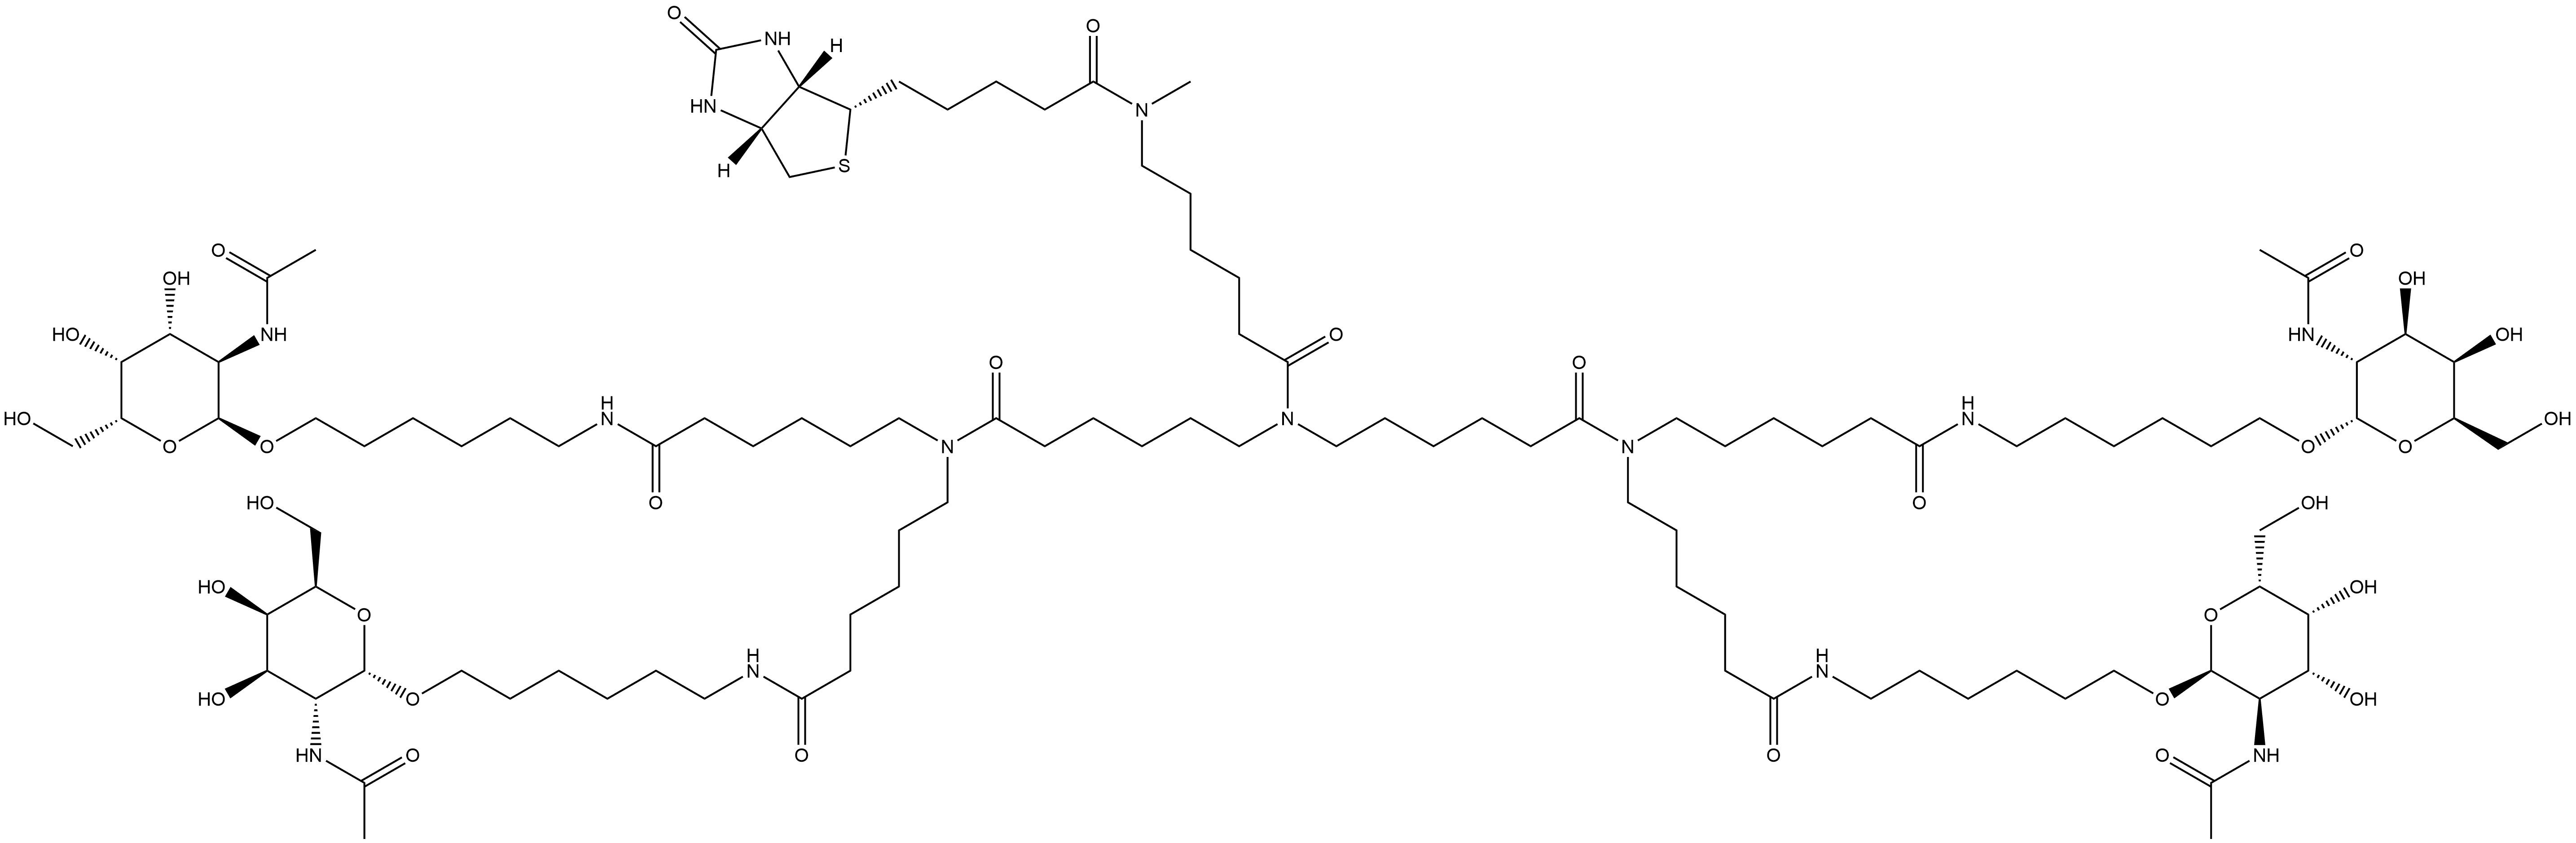 (3aS,4S,6aR)-N-[6-[Bis[6-[bis[6-[[6-[[2-(acetylamino)-2-deoxy-α-D-galactopyranosyl]oxy]hexyl]amino]-6-oxohexyl]amino]-6-oxohexyl]amino]-6-oxohexyl]hexahydro-N-methyl-2-oxo-1H-thieno[3,4-d]imidazole-4-pentanamide Structure